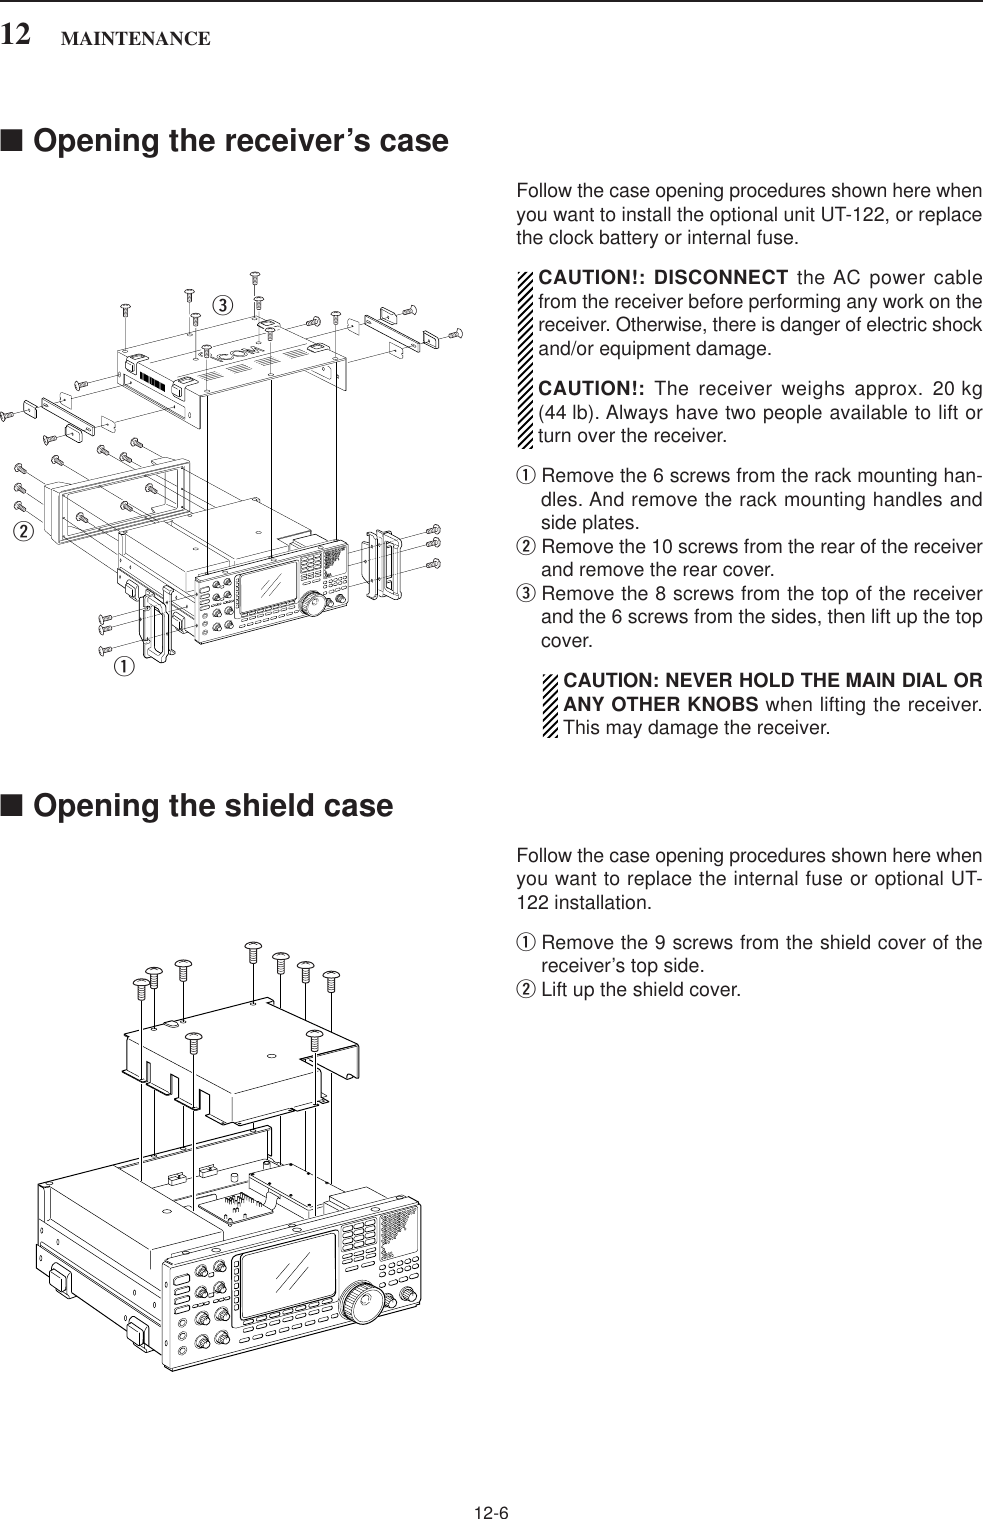 12-6■Opening the receiver’s caseFollow the case opening procedures shown here whenyou want to install the optional unit UT-122, or replacethe clock battery or internal fuse.CAUTION!: DISCONNECT the AC power cablefrom the receiver before performing any work on thereceiver. Otherwise, there is danger of electric shockand/or equipment damage.CAUTION!: The receiver weighs approx. 20 kg(44 lb). Always have two people available to lift orturn over the receiver. qRemove the 6 screws from the rack mounting han-dles. And remove the rack mounting handles andside plates.wRemove the 10 screws from the rear of the receiverand remove the rear cover.eRemove the 8 screws from the top of the receiverand the 6 screws from the sides, then lift up the topcover.CAUTION: NEVER HOLD THE MAIN DIAL ORANY OTHER KNOBS when lifting the receiver.This may damage the receiver.■Opening the shield caseFollow the case opening procedures shown here whenyou want to replace the internal fuse or optional UT-122 installation.qRemove the 9 screws from the shield cover of thereceiver’s top side.wLift up the shield cover.qwe12 MAINTENANCE